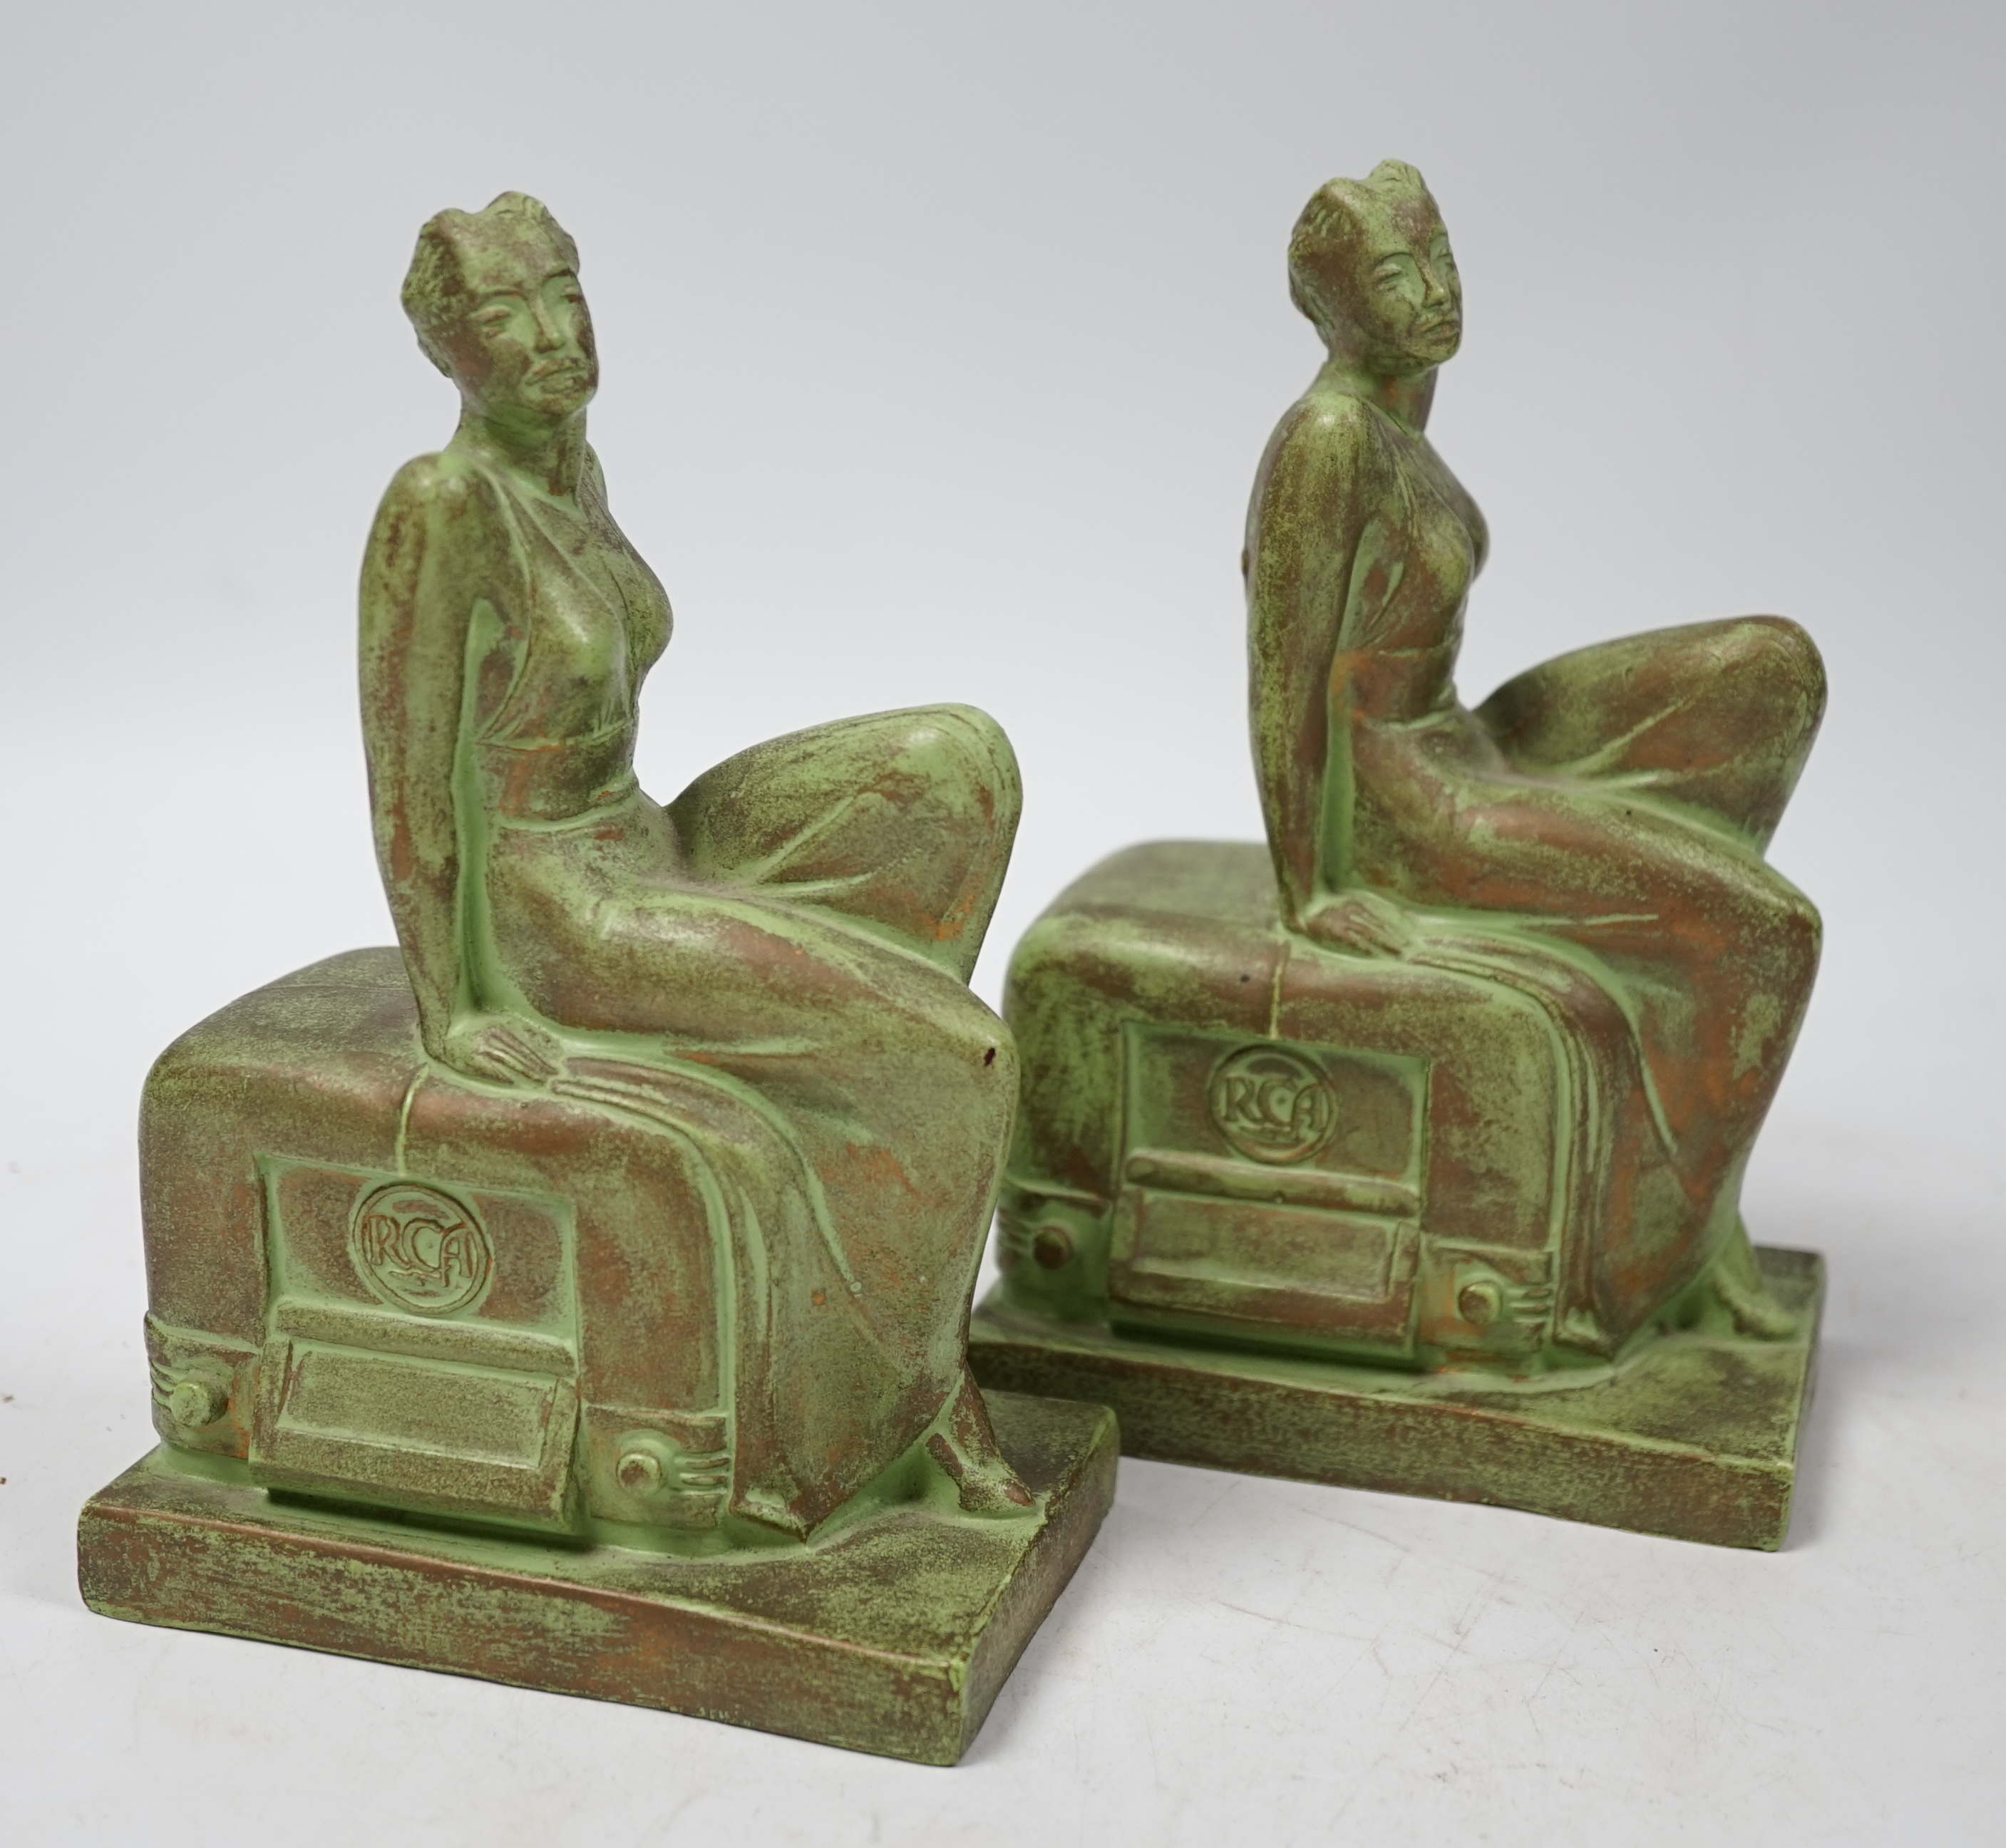 A pair of Art Deco RCA Victor bronzed ceramic ‘chalkwear’ bookends, in the form of a woman sitting on a 1930s radio, produced for the 1939 New York World Fair to promote the RCA Victor record label, 17cm high